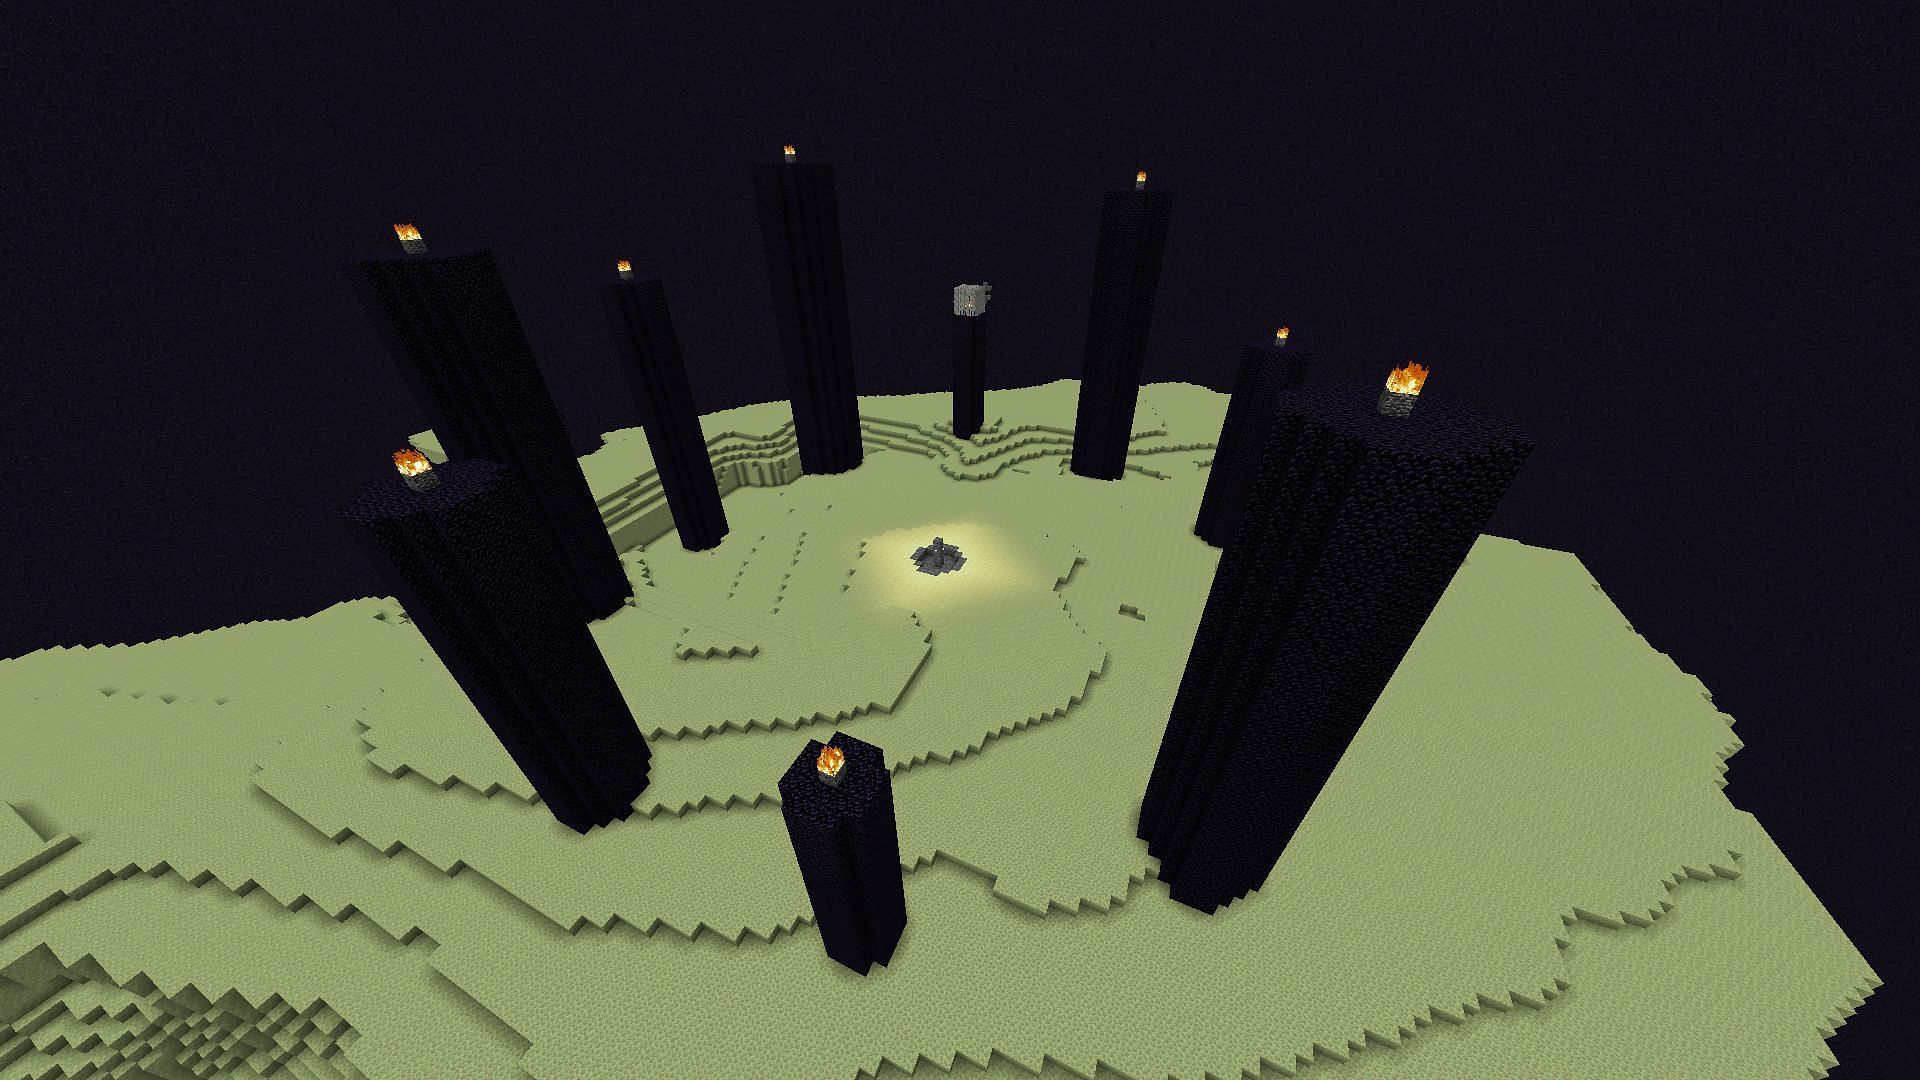 Players can create various kinds of structures in the End realm of Minecraft (Image via Mojang)